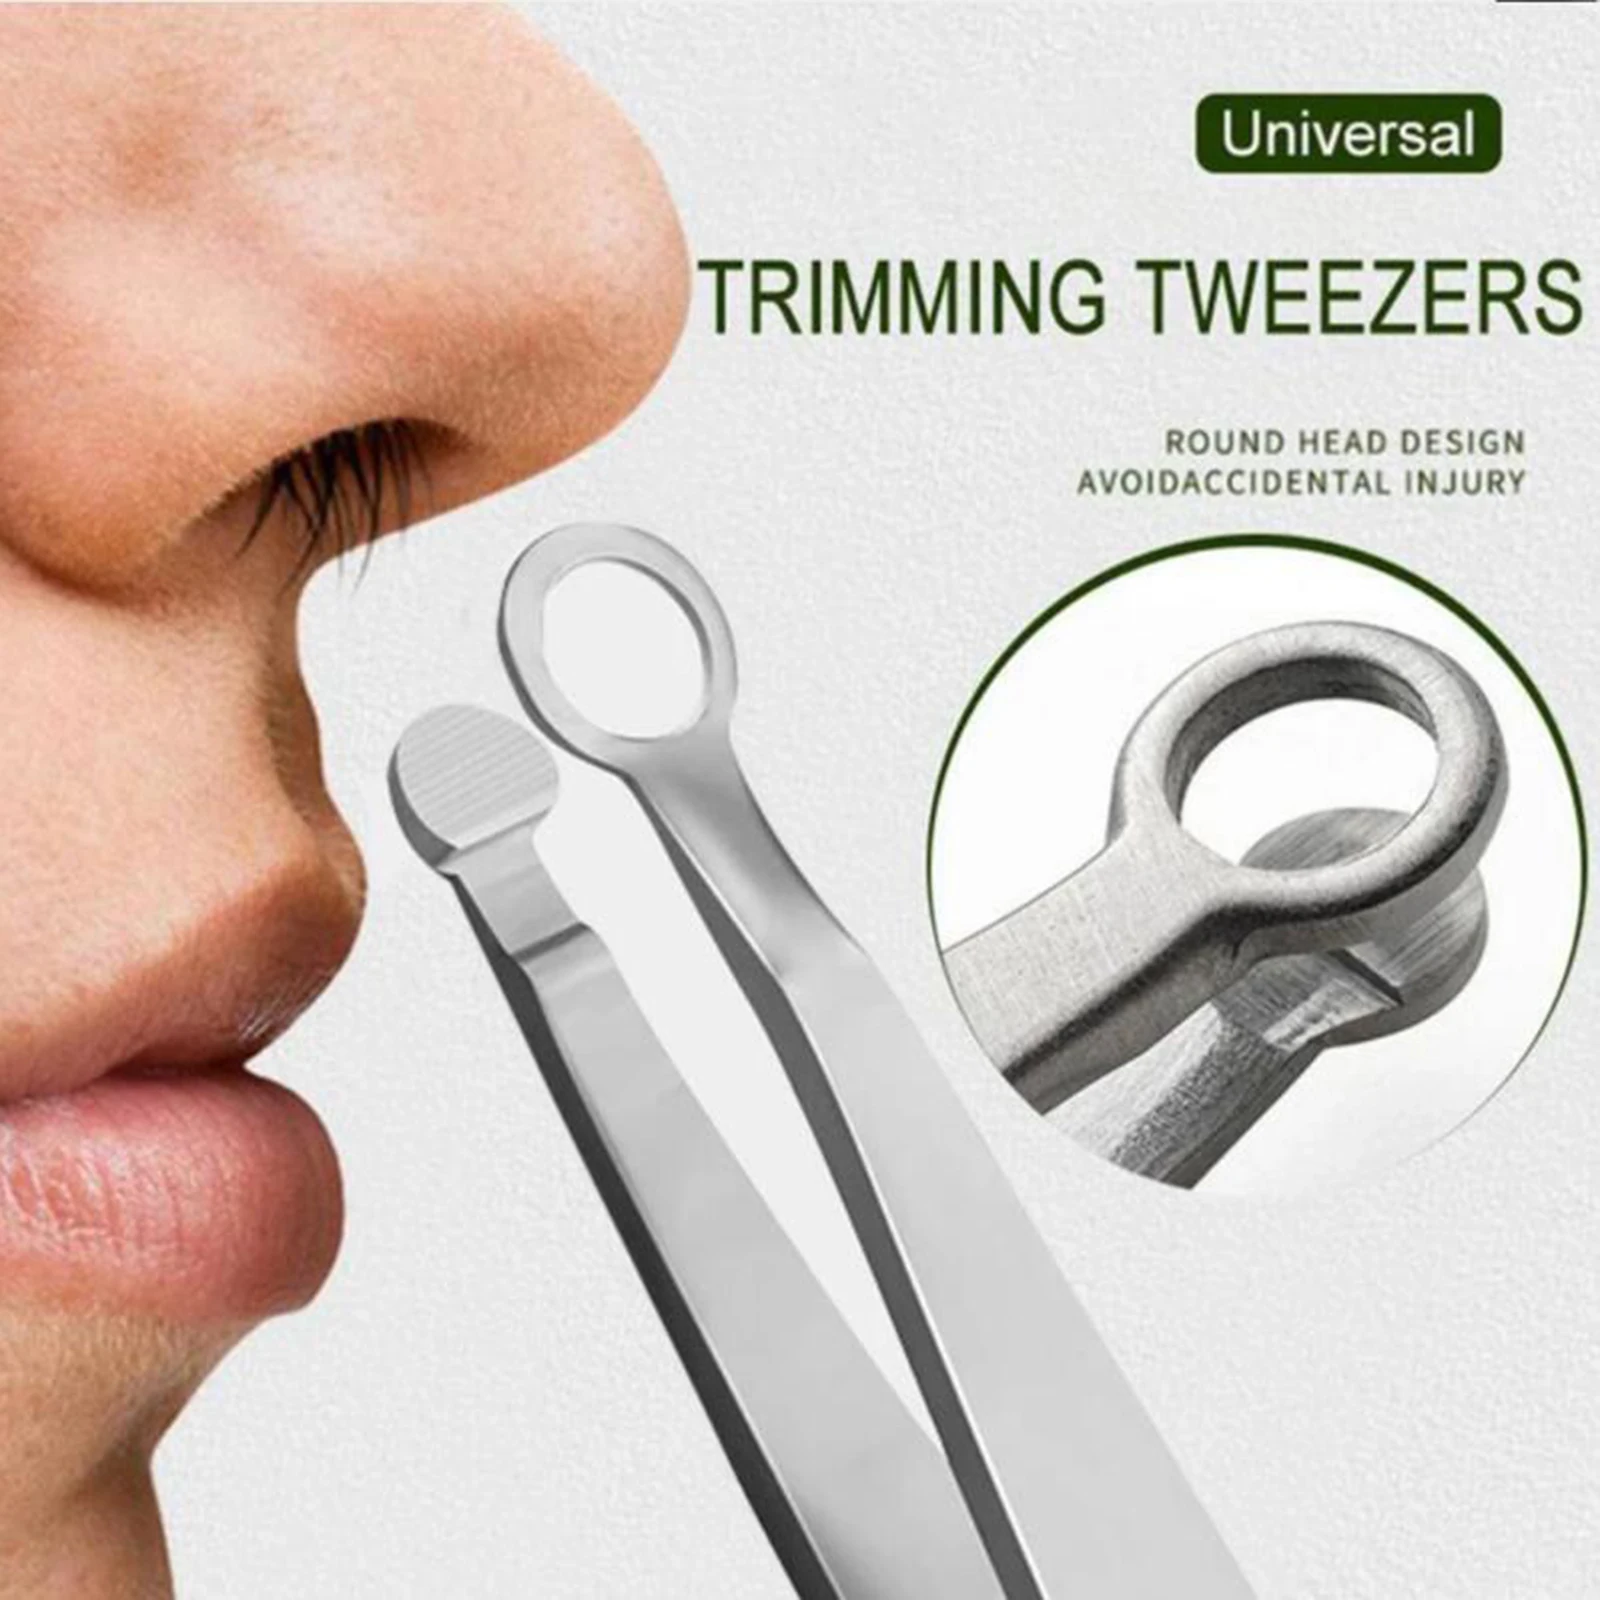 Stainless Steel Nose Hair Trimming Tweezers Safe Trimmer Round Tip Design Perfect Nose Hair Removal Trimming  for Shaving Tools